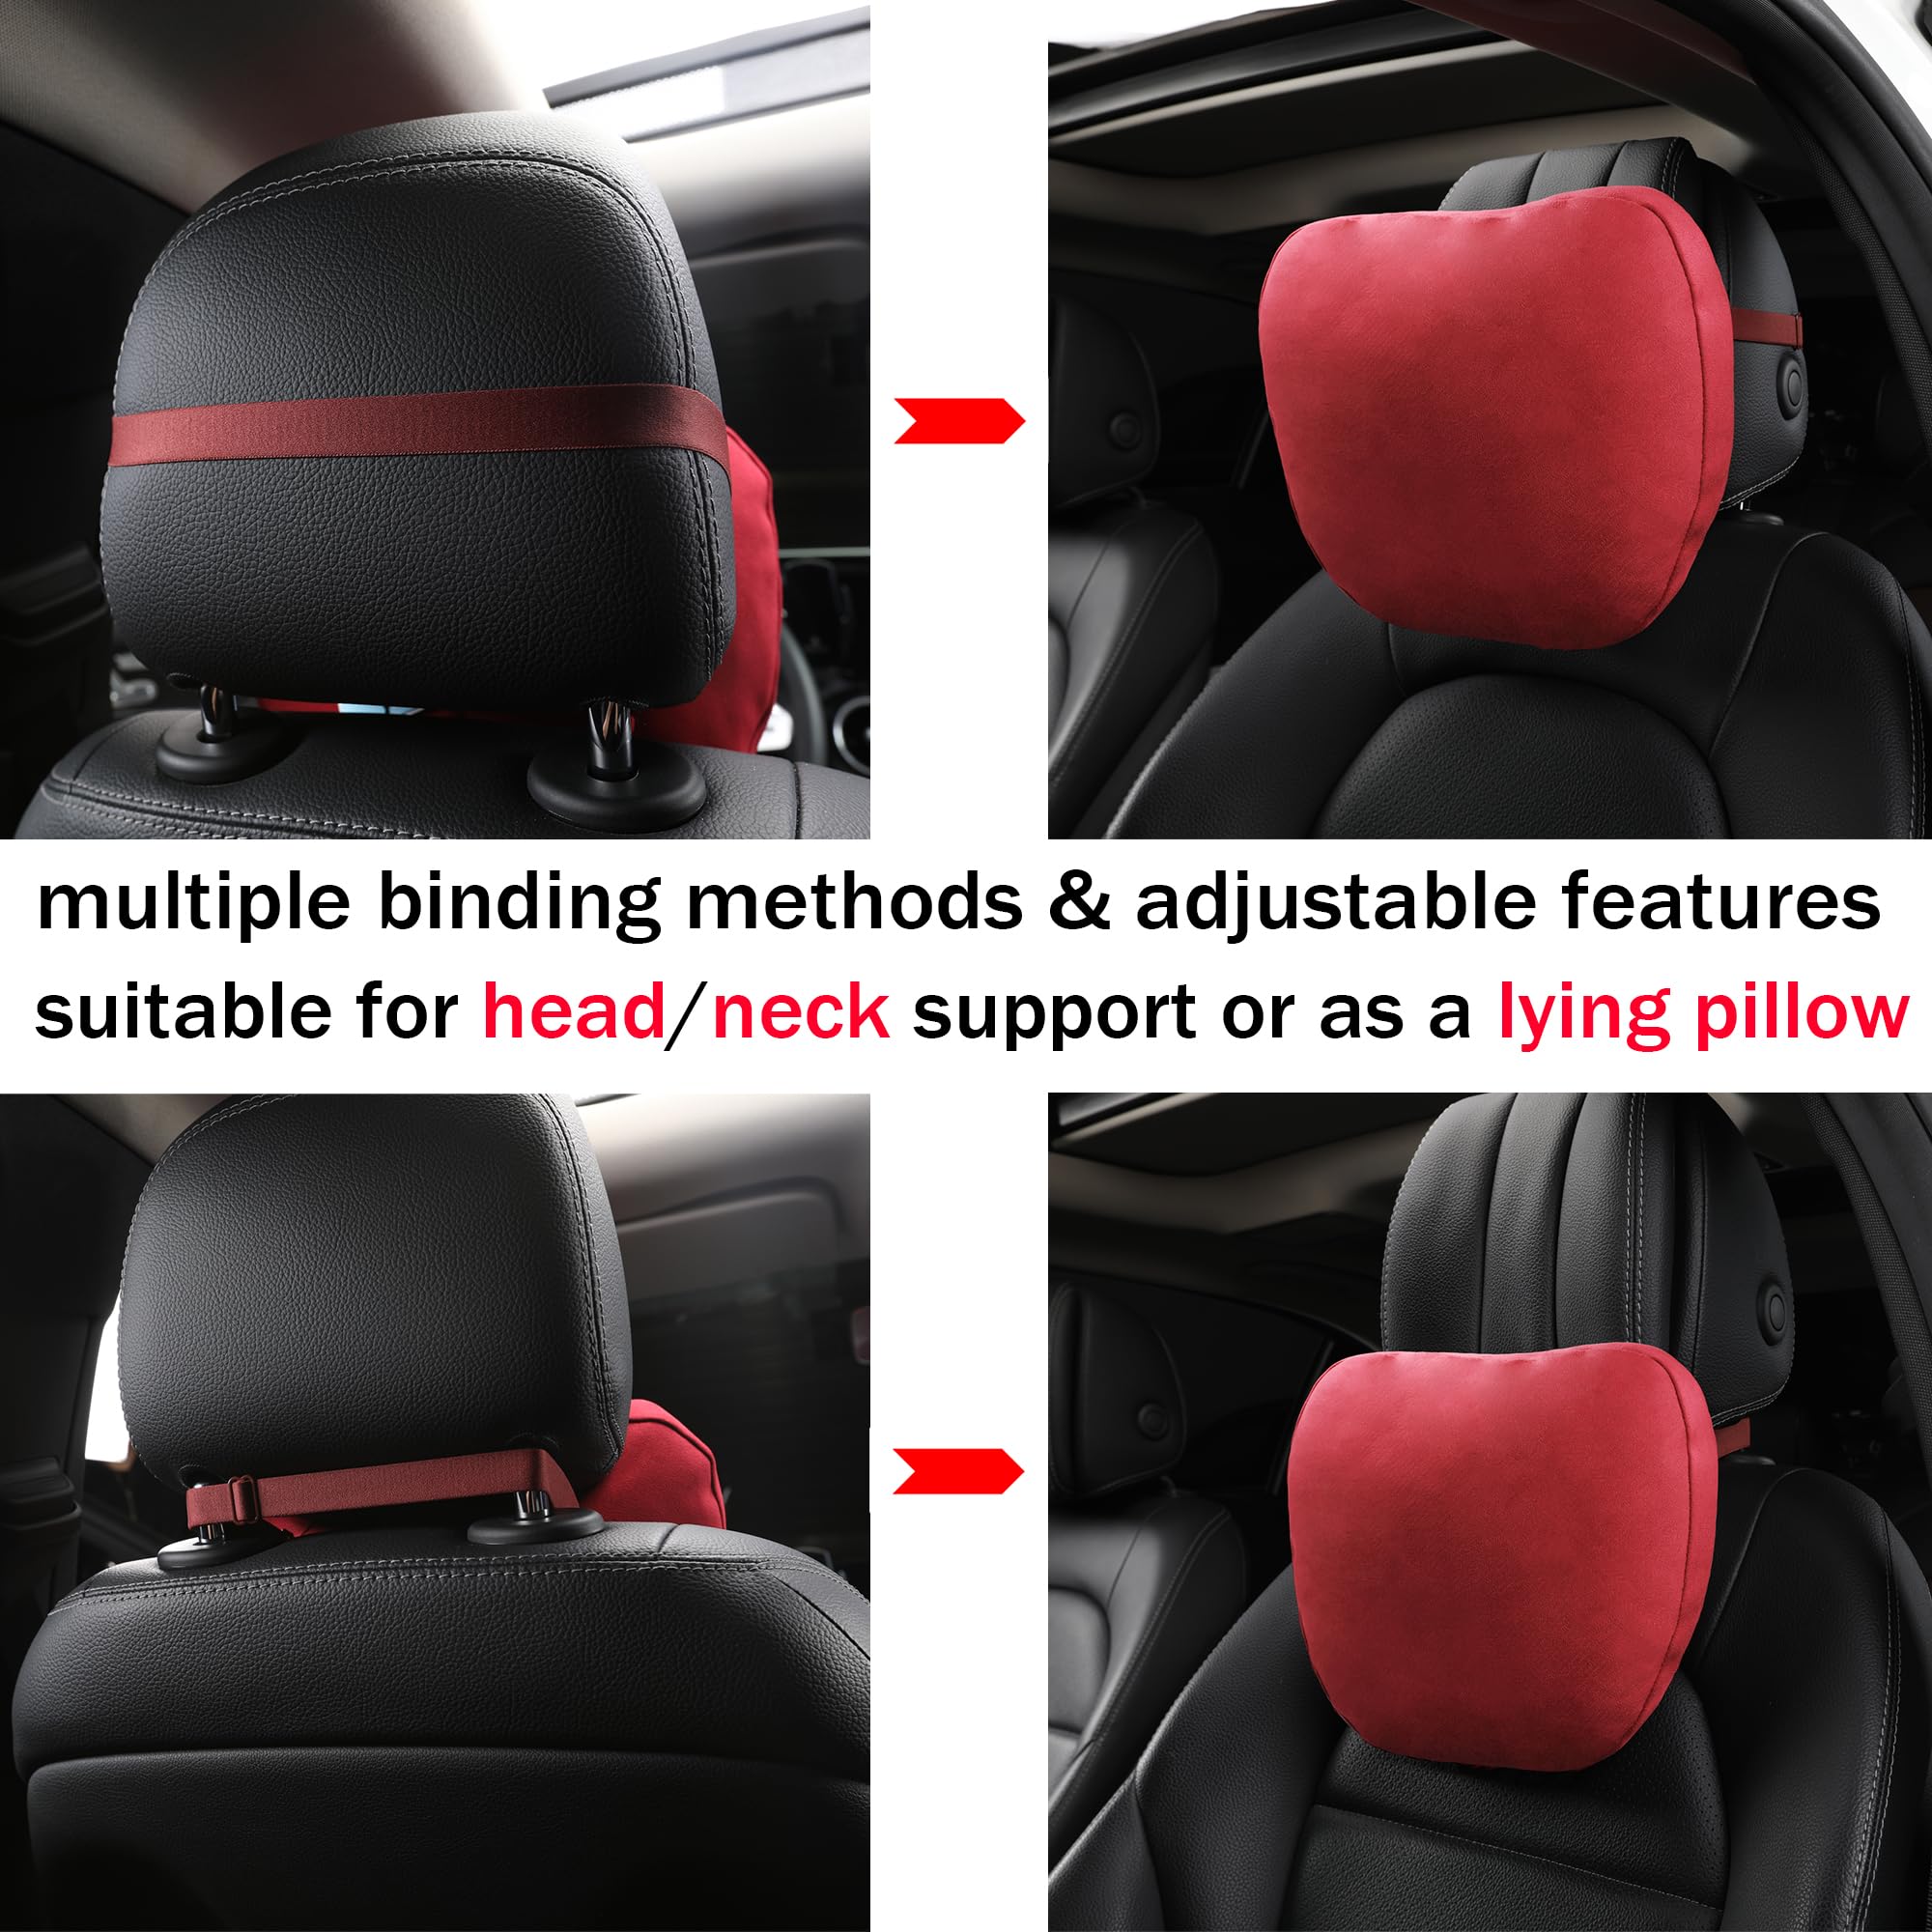 POKSRI Car Neck Pillow for Driving headrests, car Support Necks Pillows,11.8x7.5inch Multiple&Adjustable Travel Working Gaming Head Rest Vehicle Cushion Seats(Black Color, car Neck Pillow 2pcs)